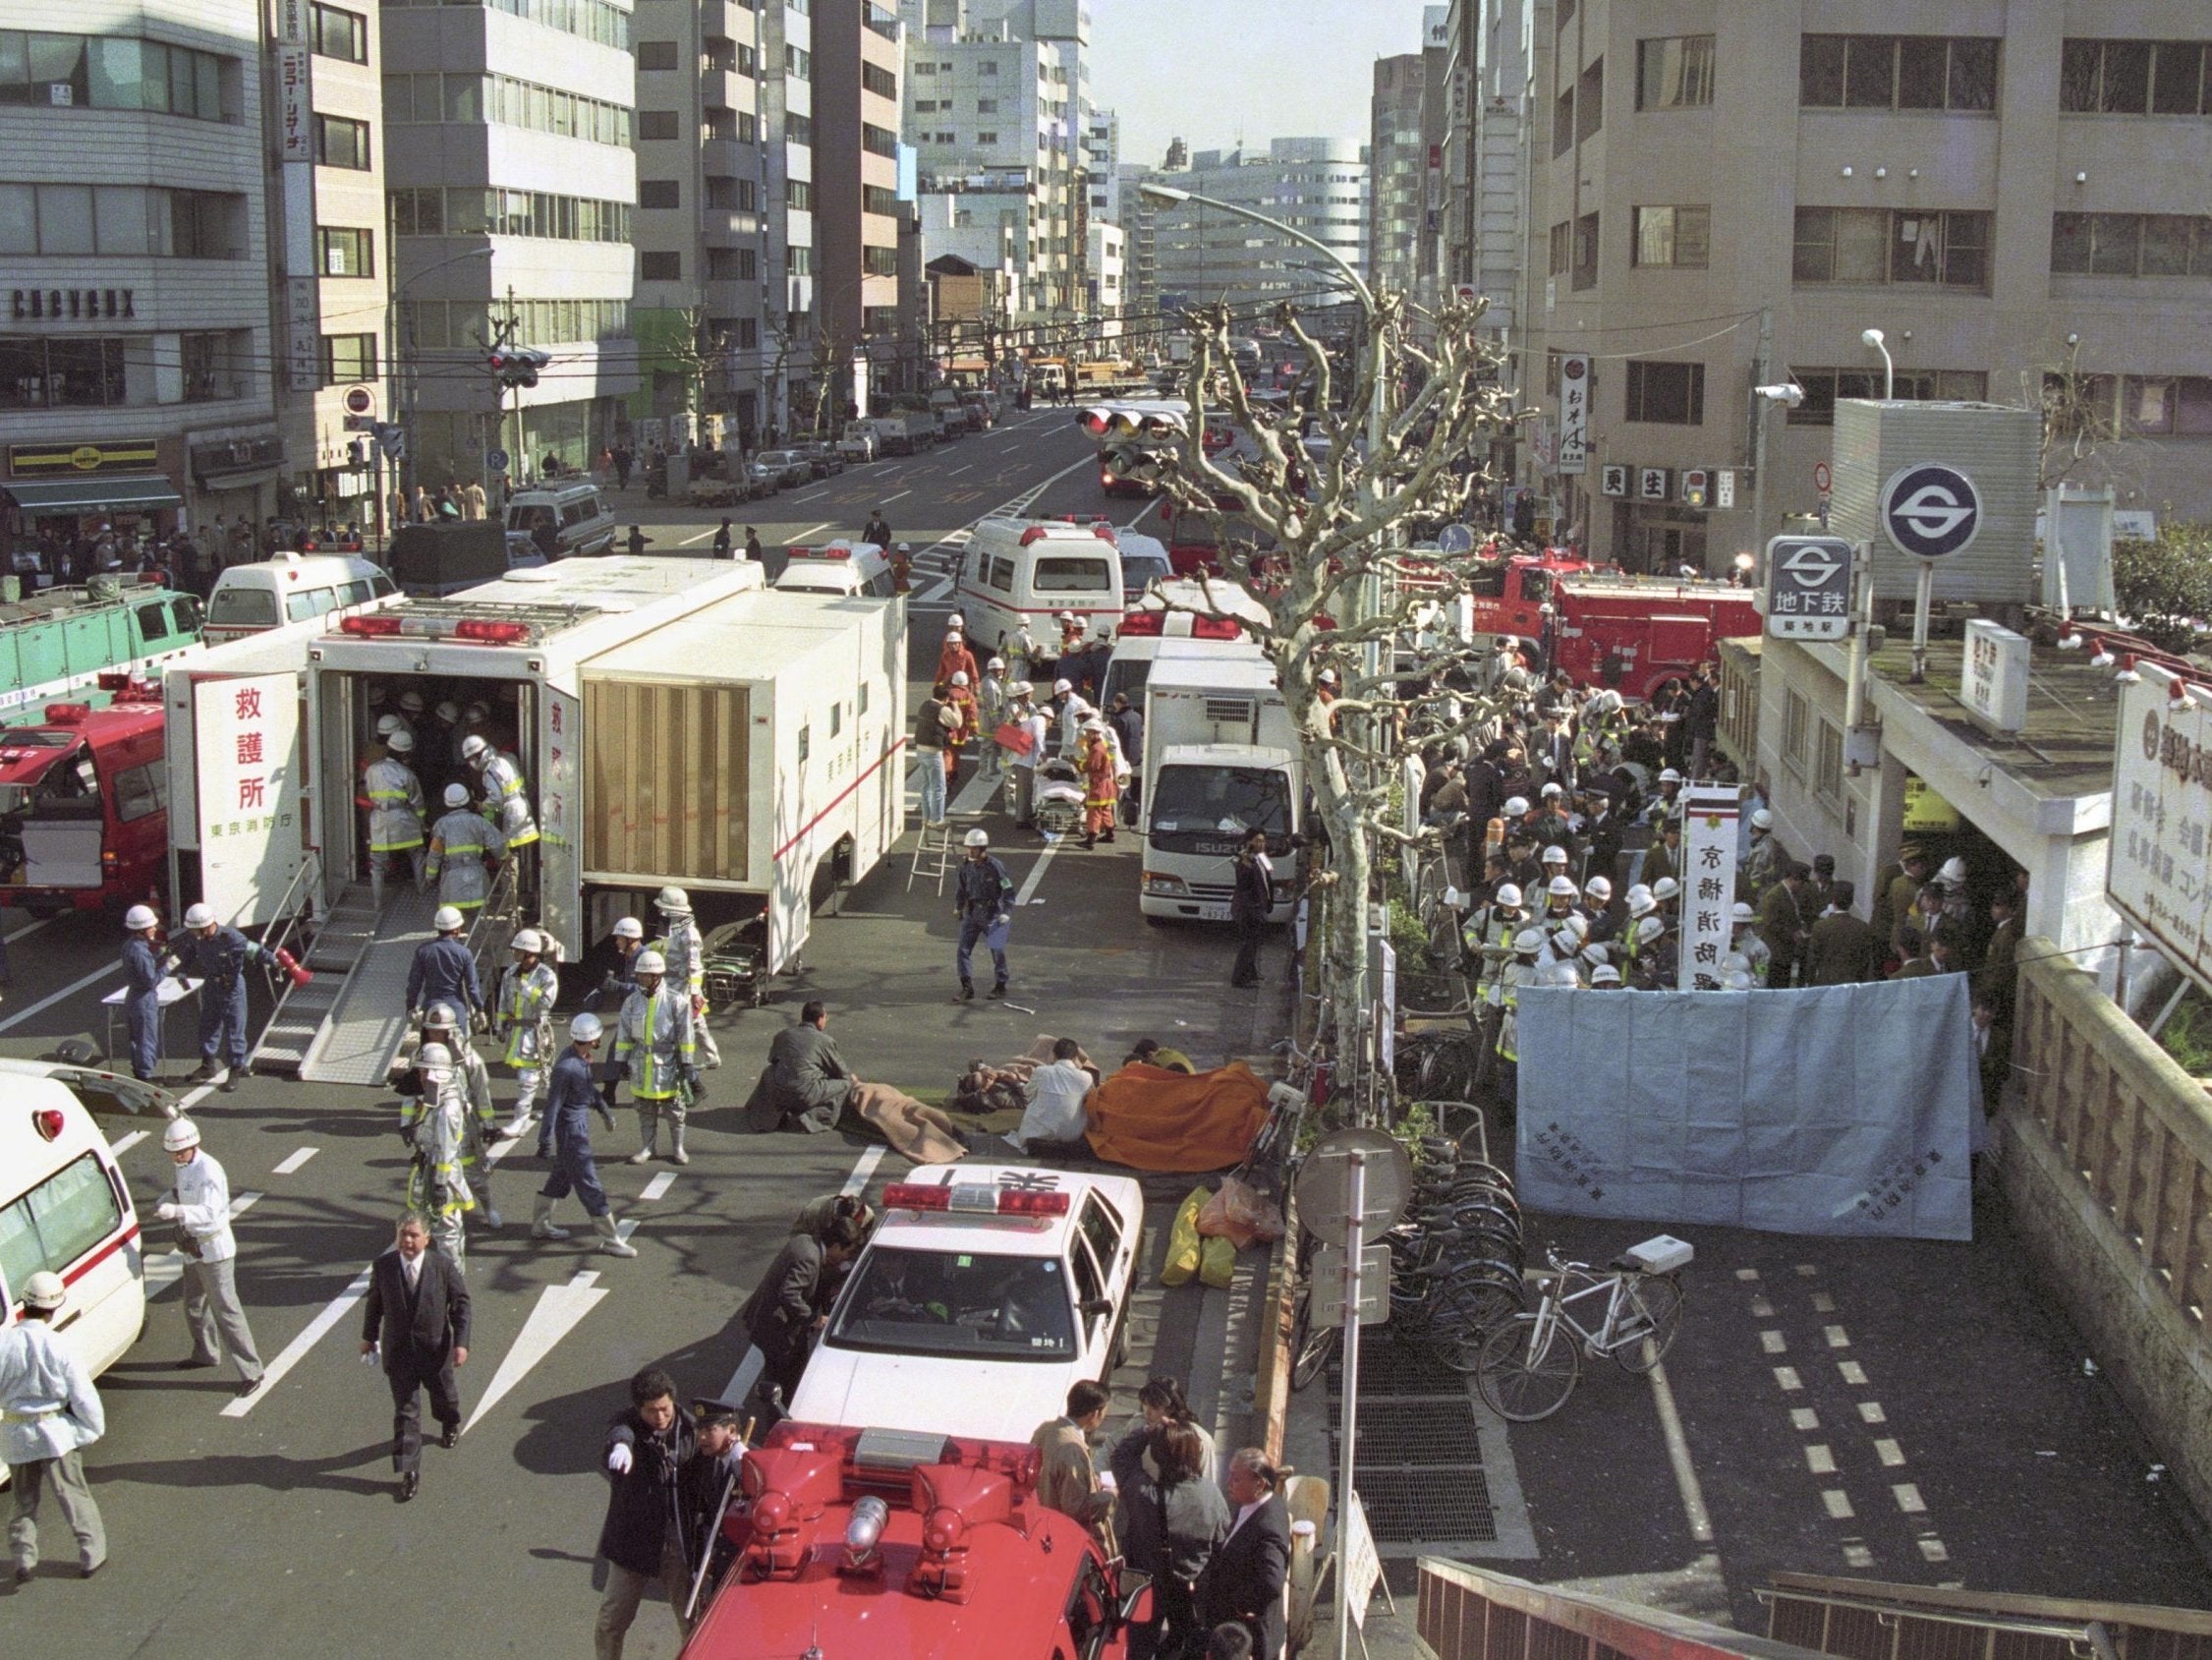 &#13;
The injured of the deadly gas attack are treated by rescue workers near Tsukiji subway station &#13;